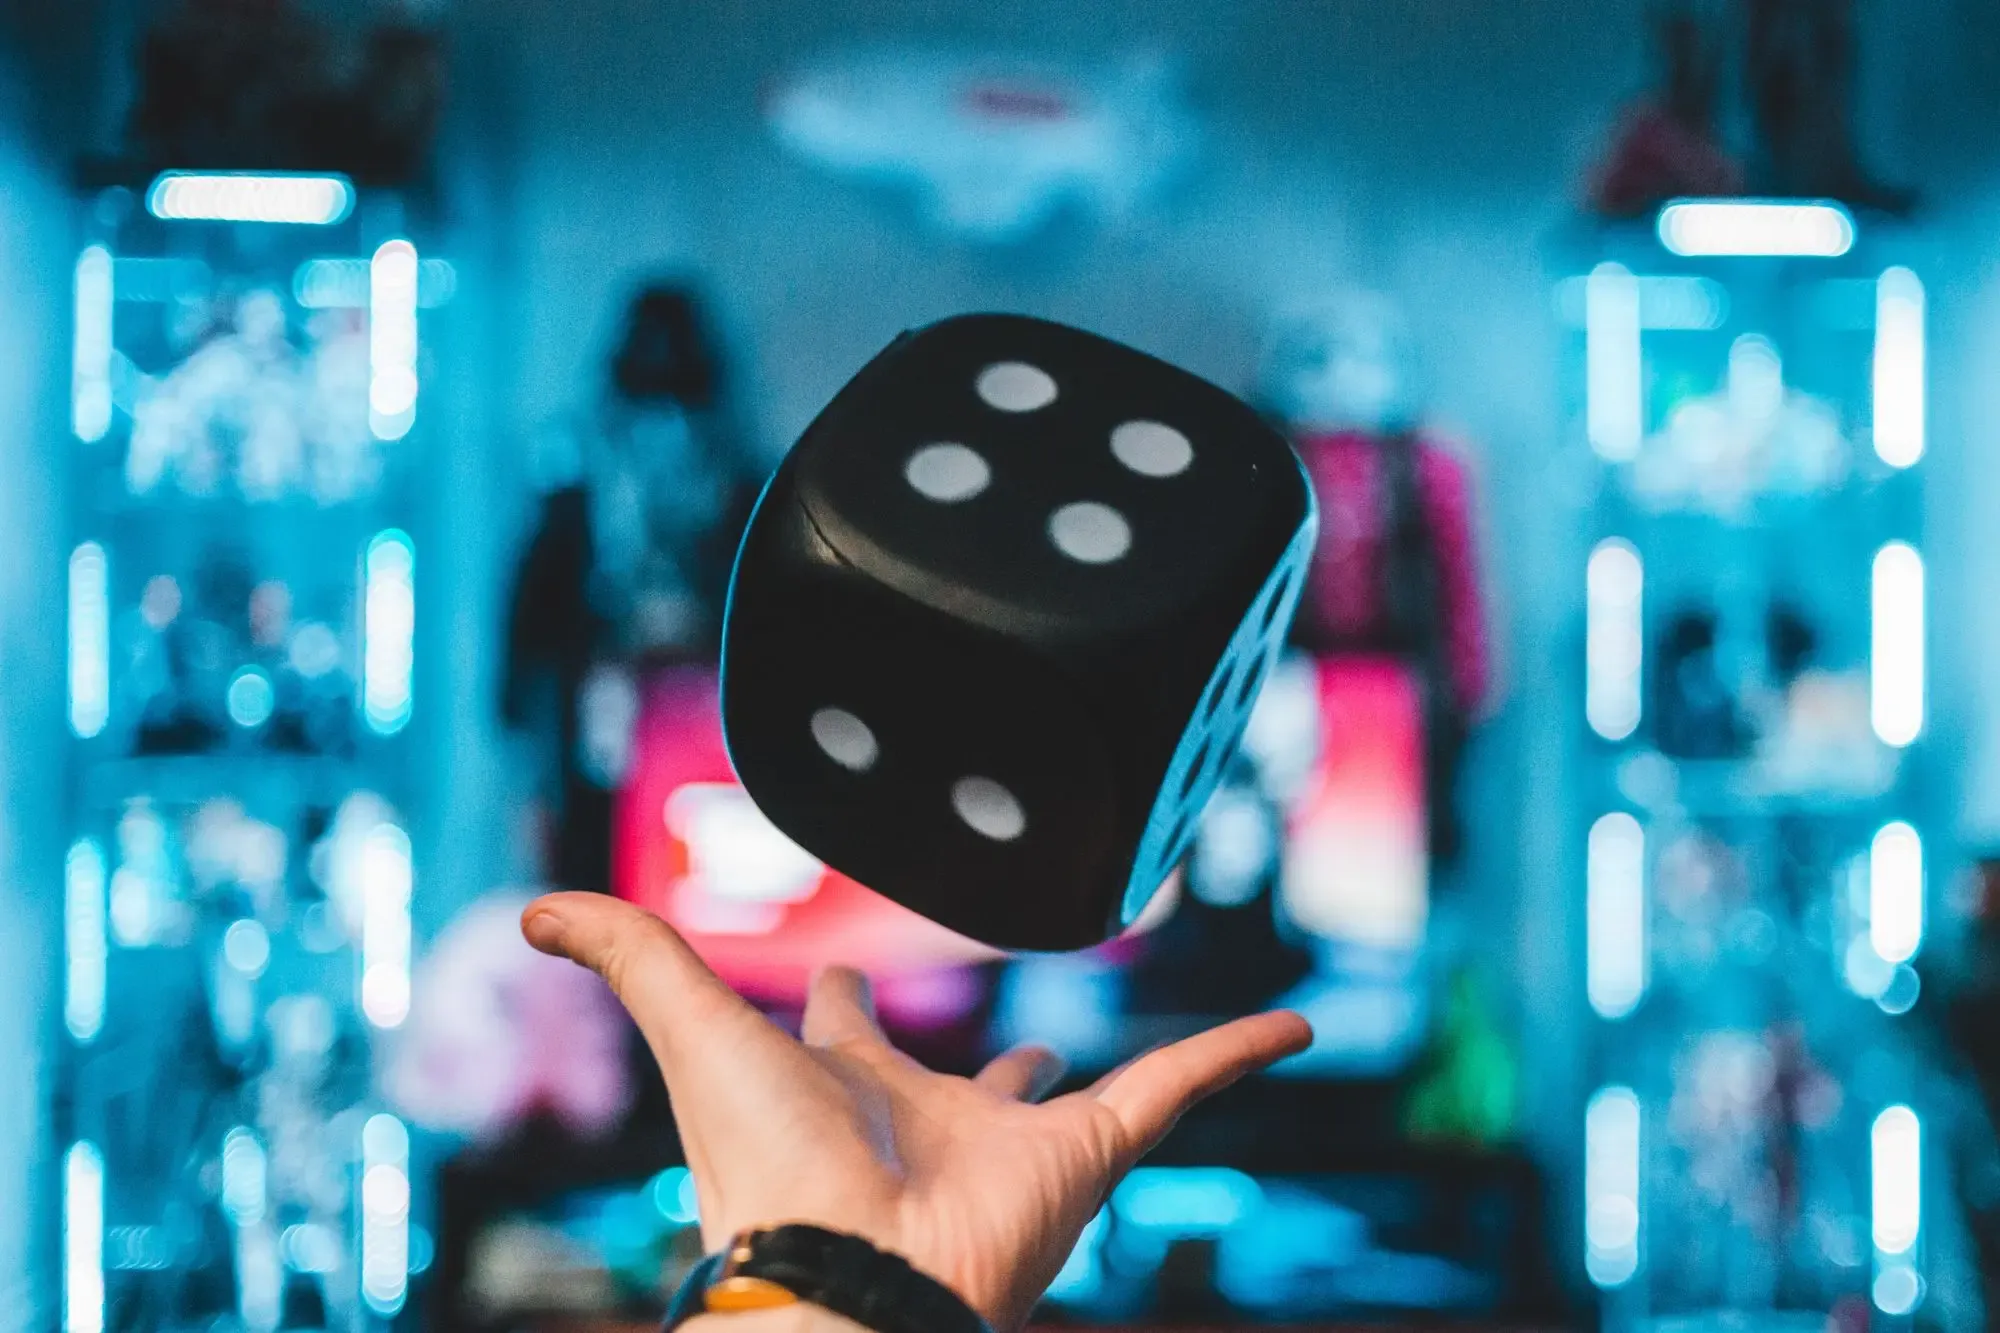 A person's hand and a large dice